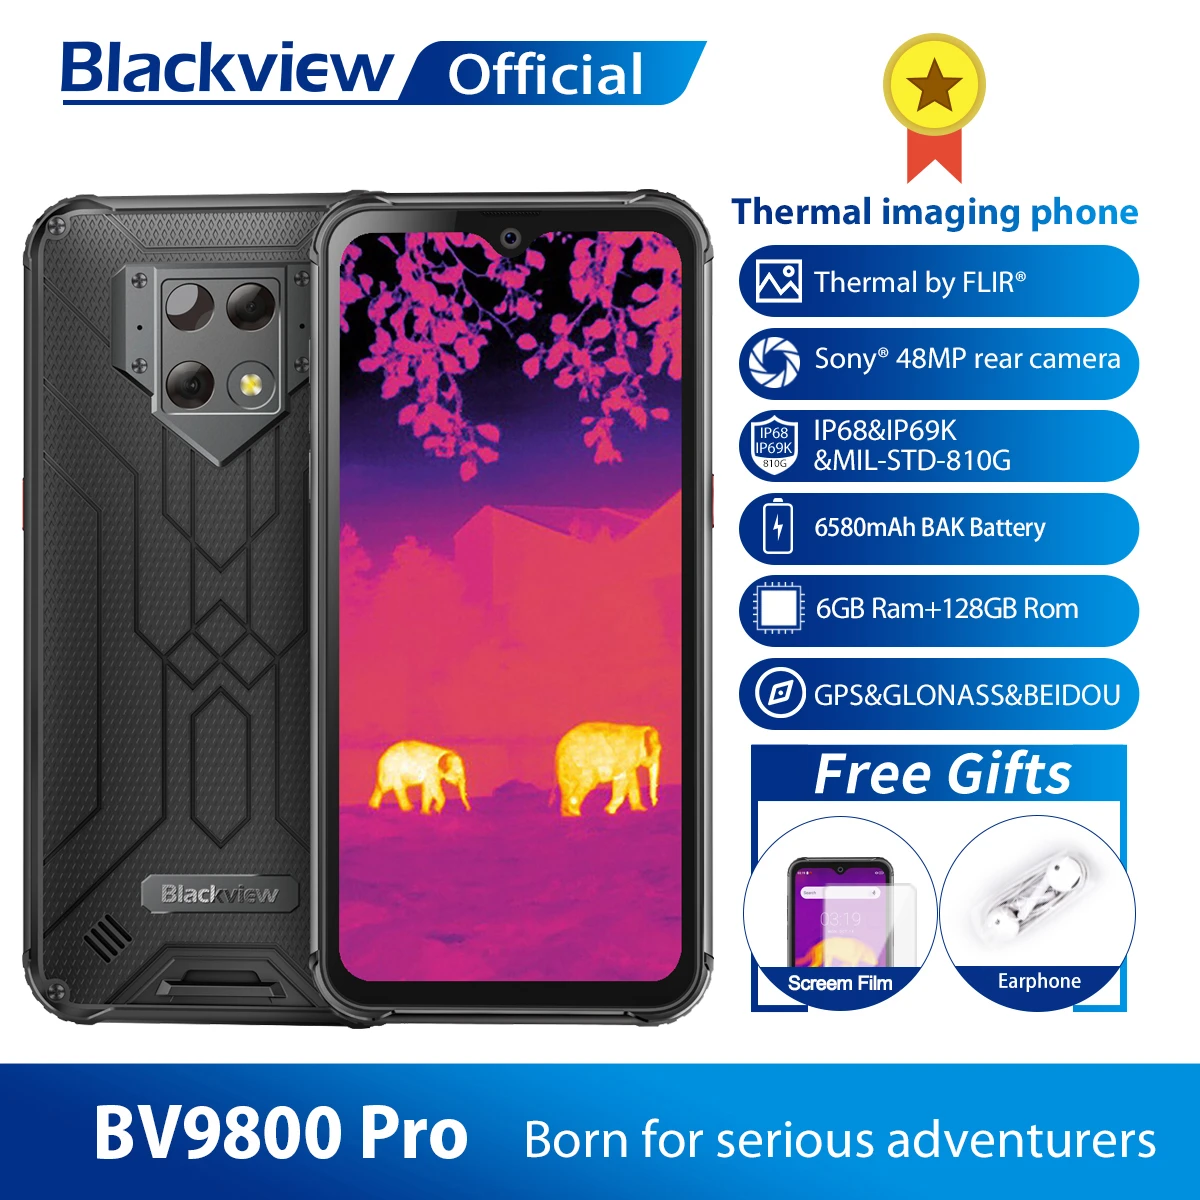 Blackview BV9800 Pro Thermal Camera Mobile Phone Helio P70 Android 9.0 6GB+128GB IP68 Waterproof 6580mAh Rugged Smartphone recommended cell phone for gaming